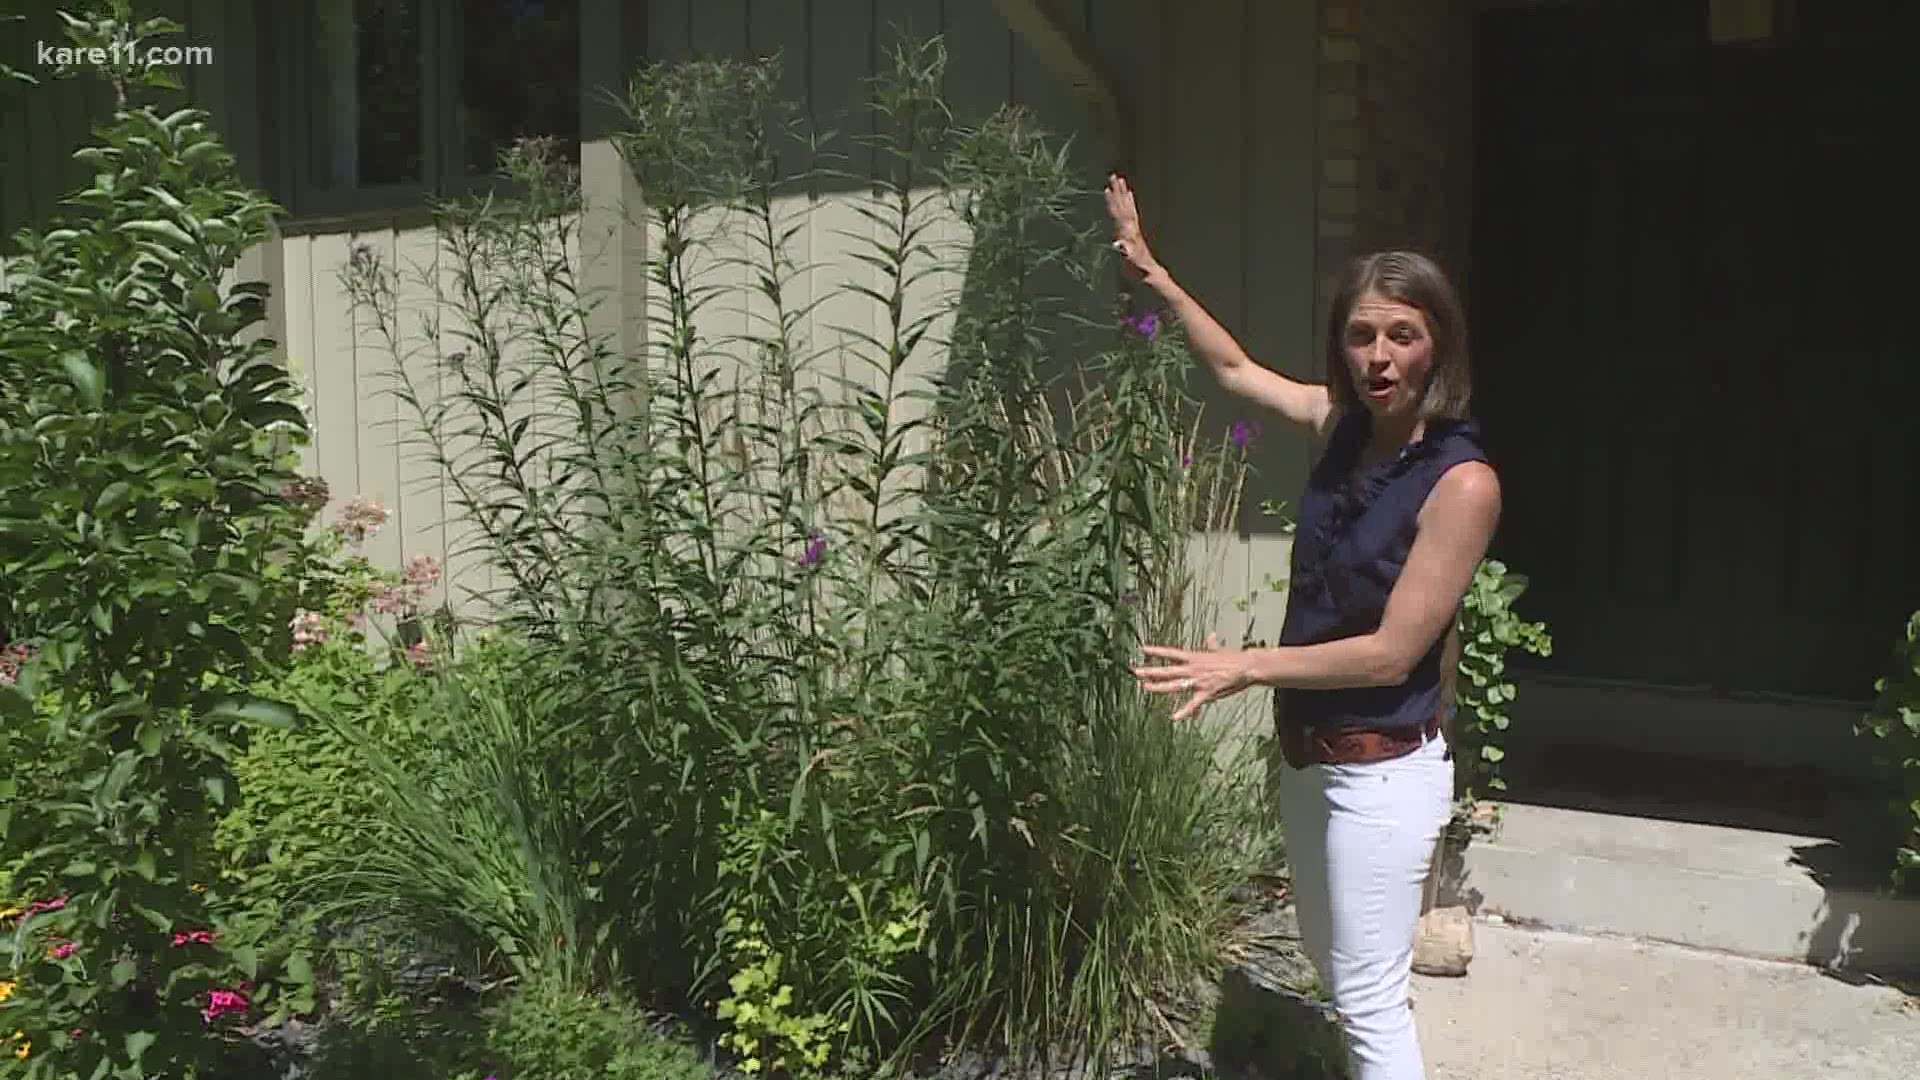 Bobby and Laura pick their favorite perennials for fall blooms.